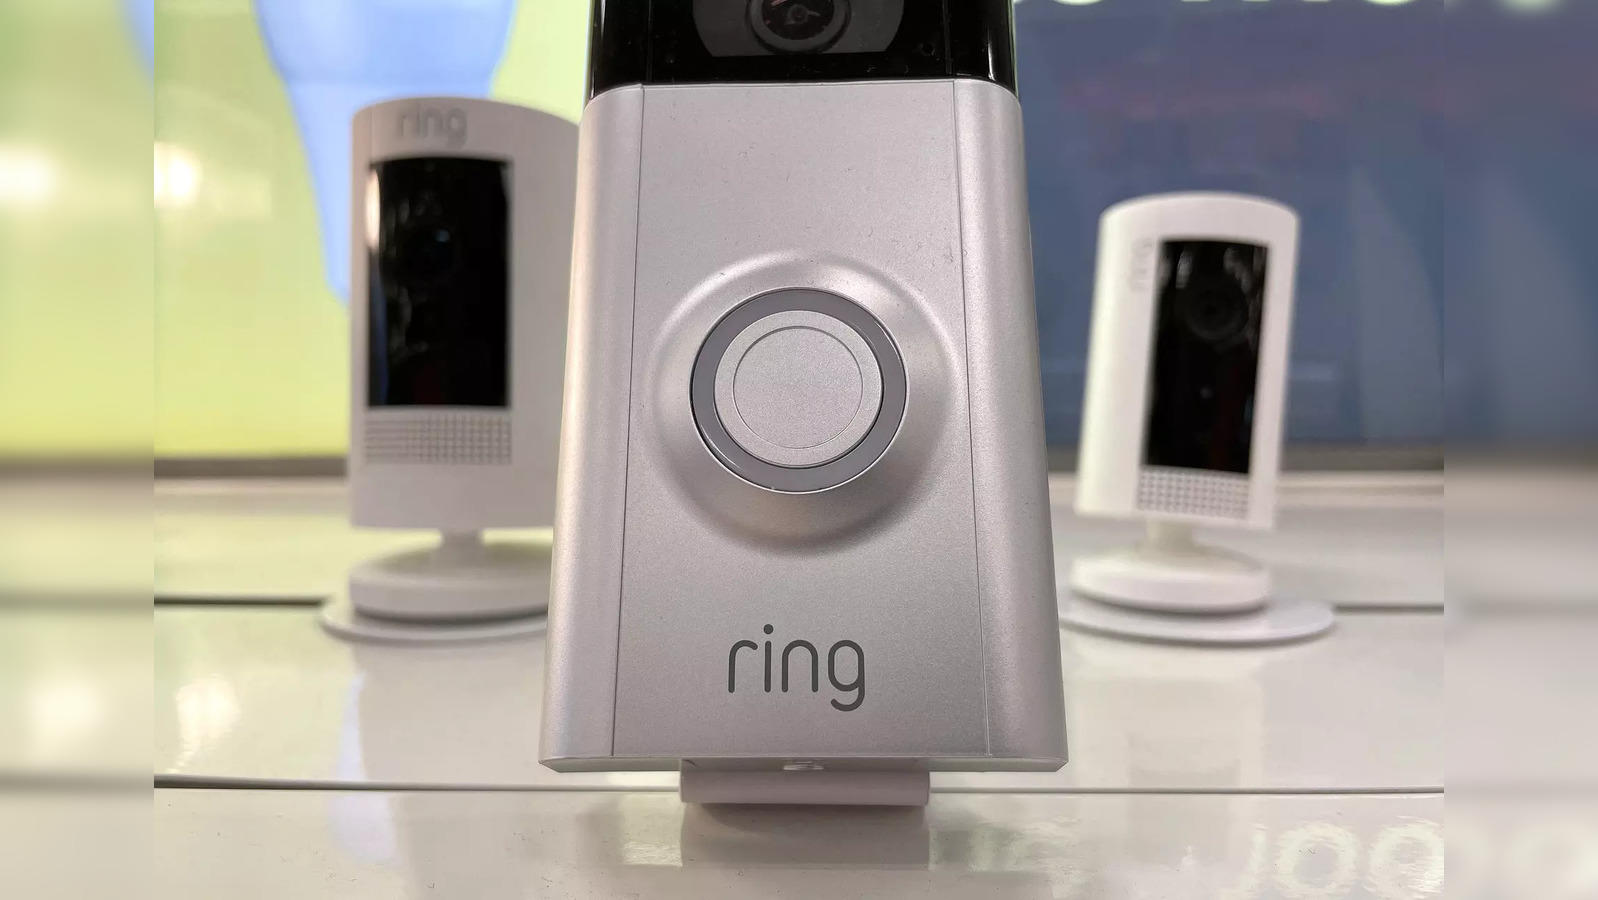   tightens police access to Ring camera video - The